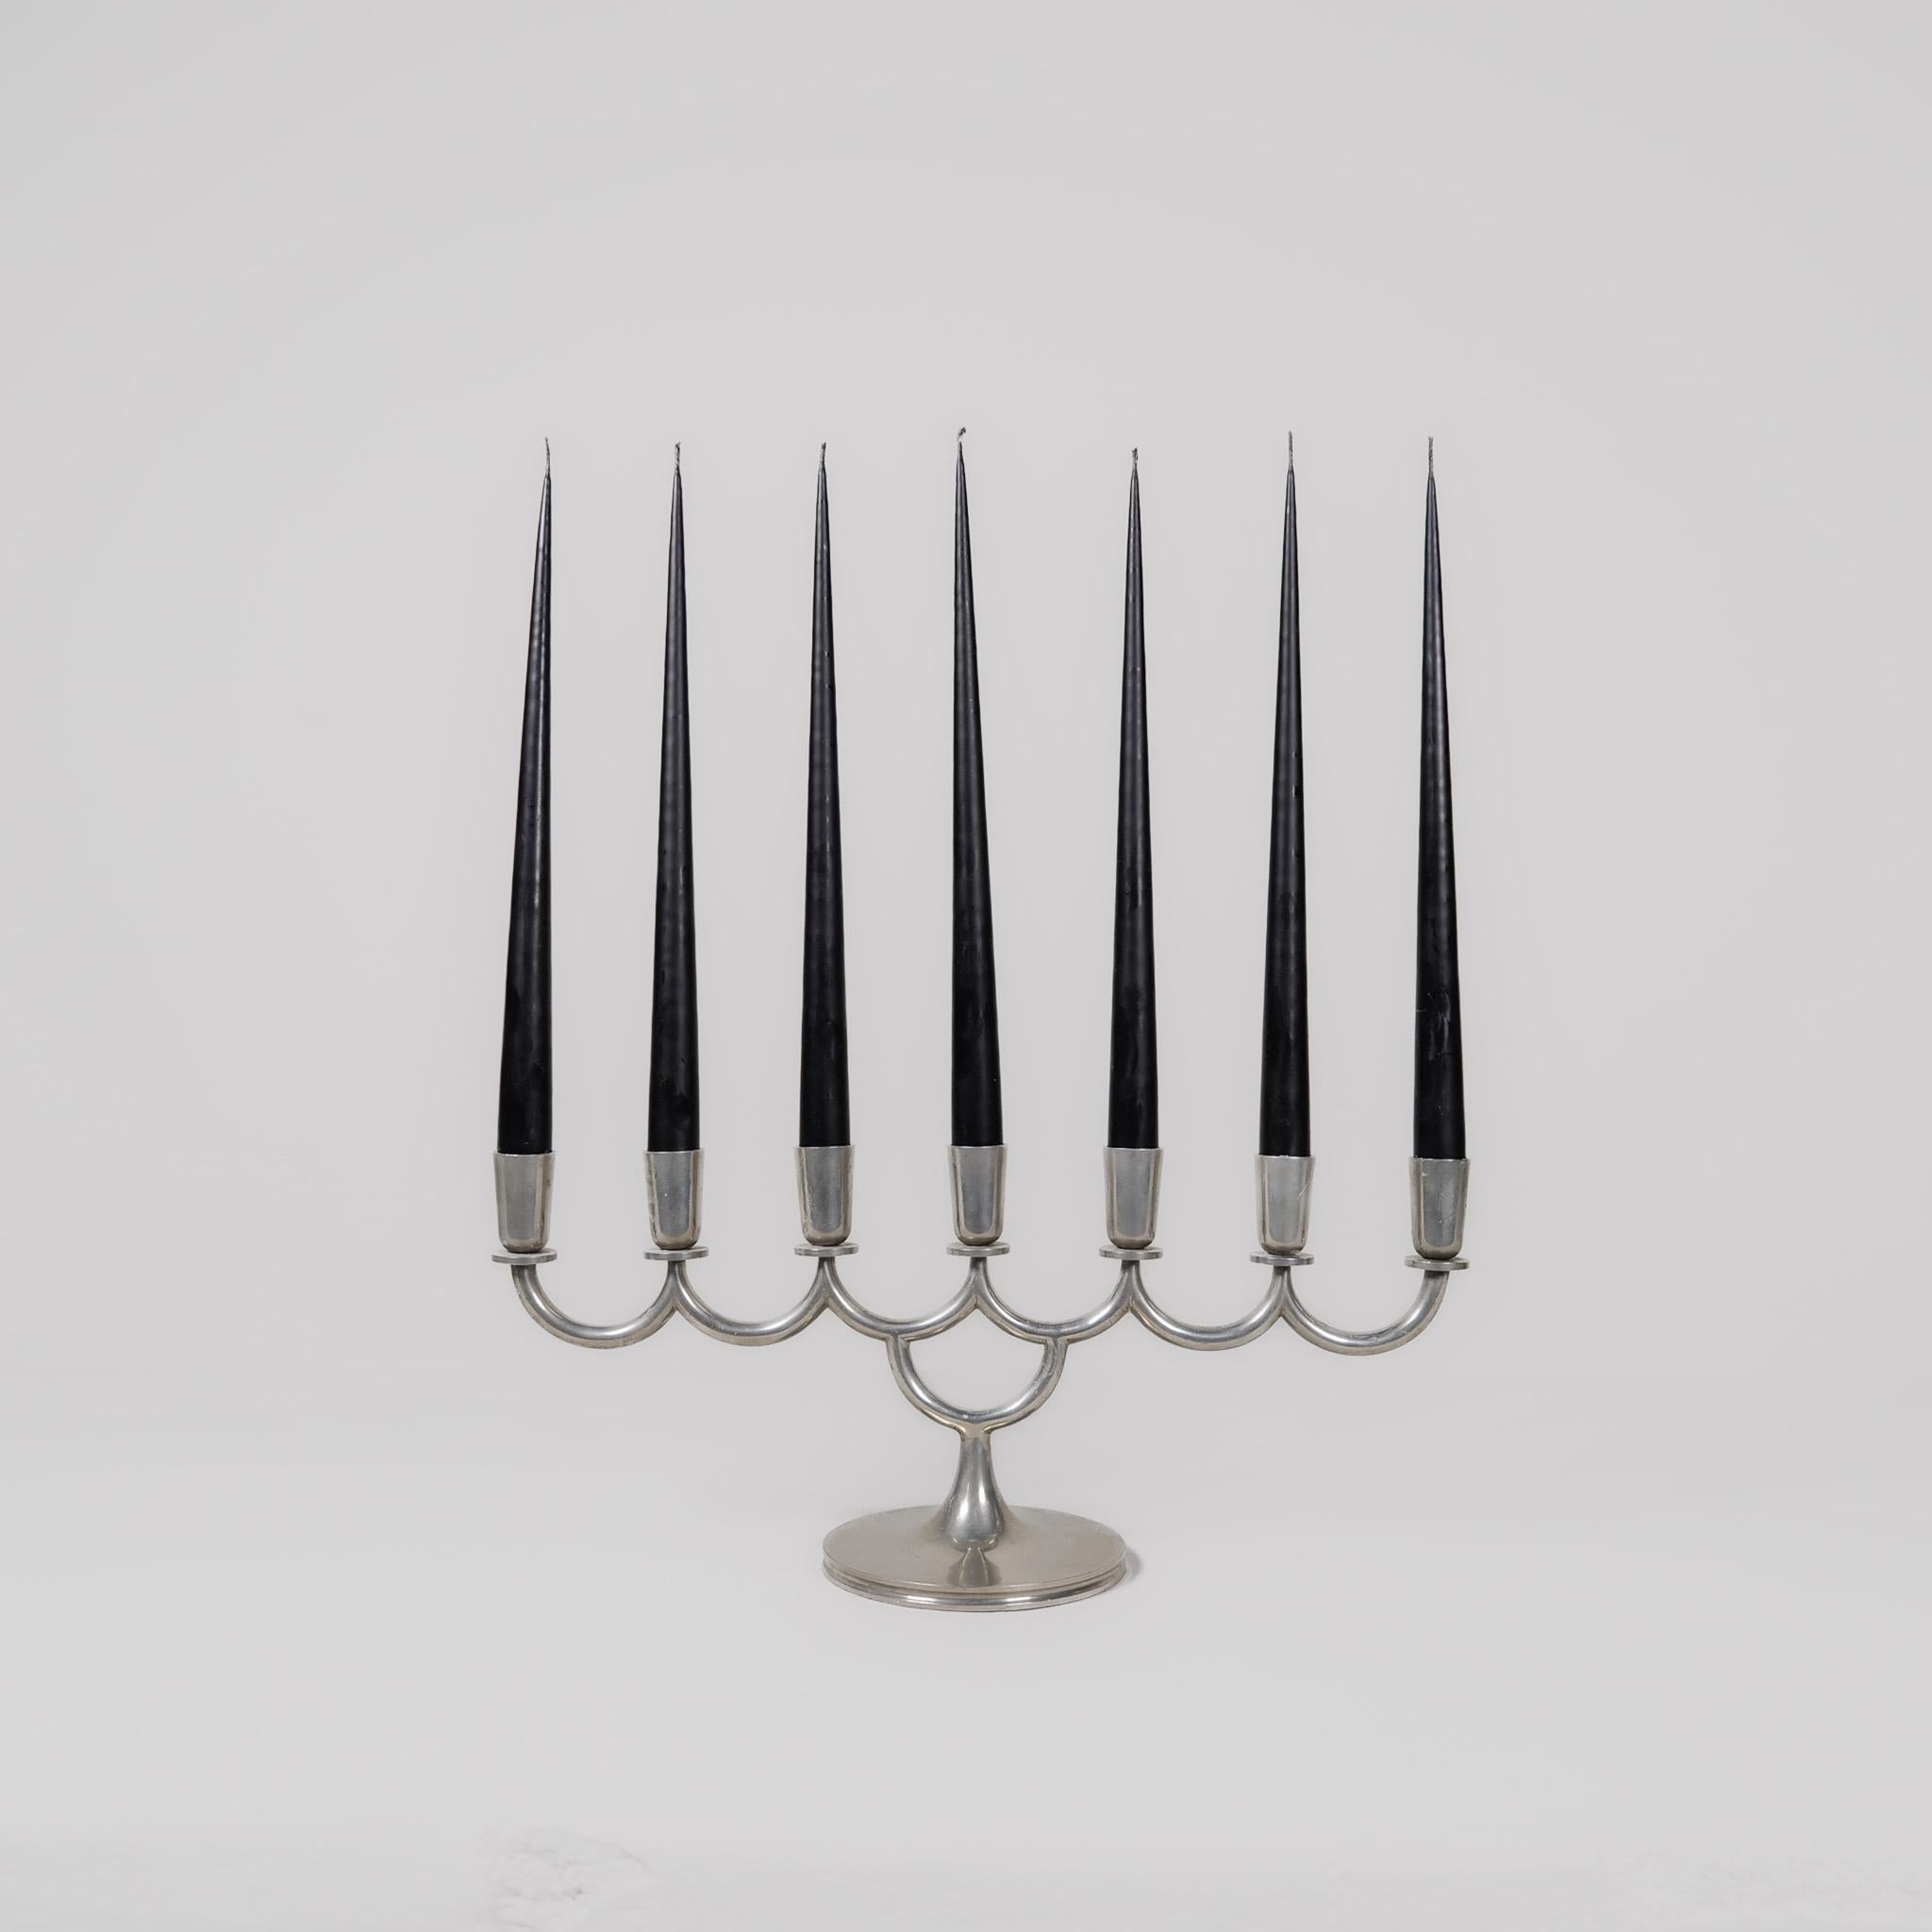 Art Deco candelabra designed by Lars Holmström. Produced by Lars Holmström in Arvika, Sweden 1931.
Wonderfully handcrafted pewter candelabra in art deco sculptured shapes. 

Signs of wear and use with a lovely patina. 

Dimensions: width 44 cm (17,3